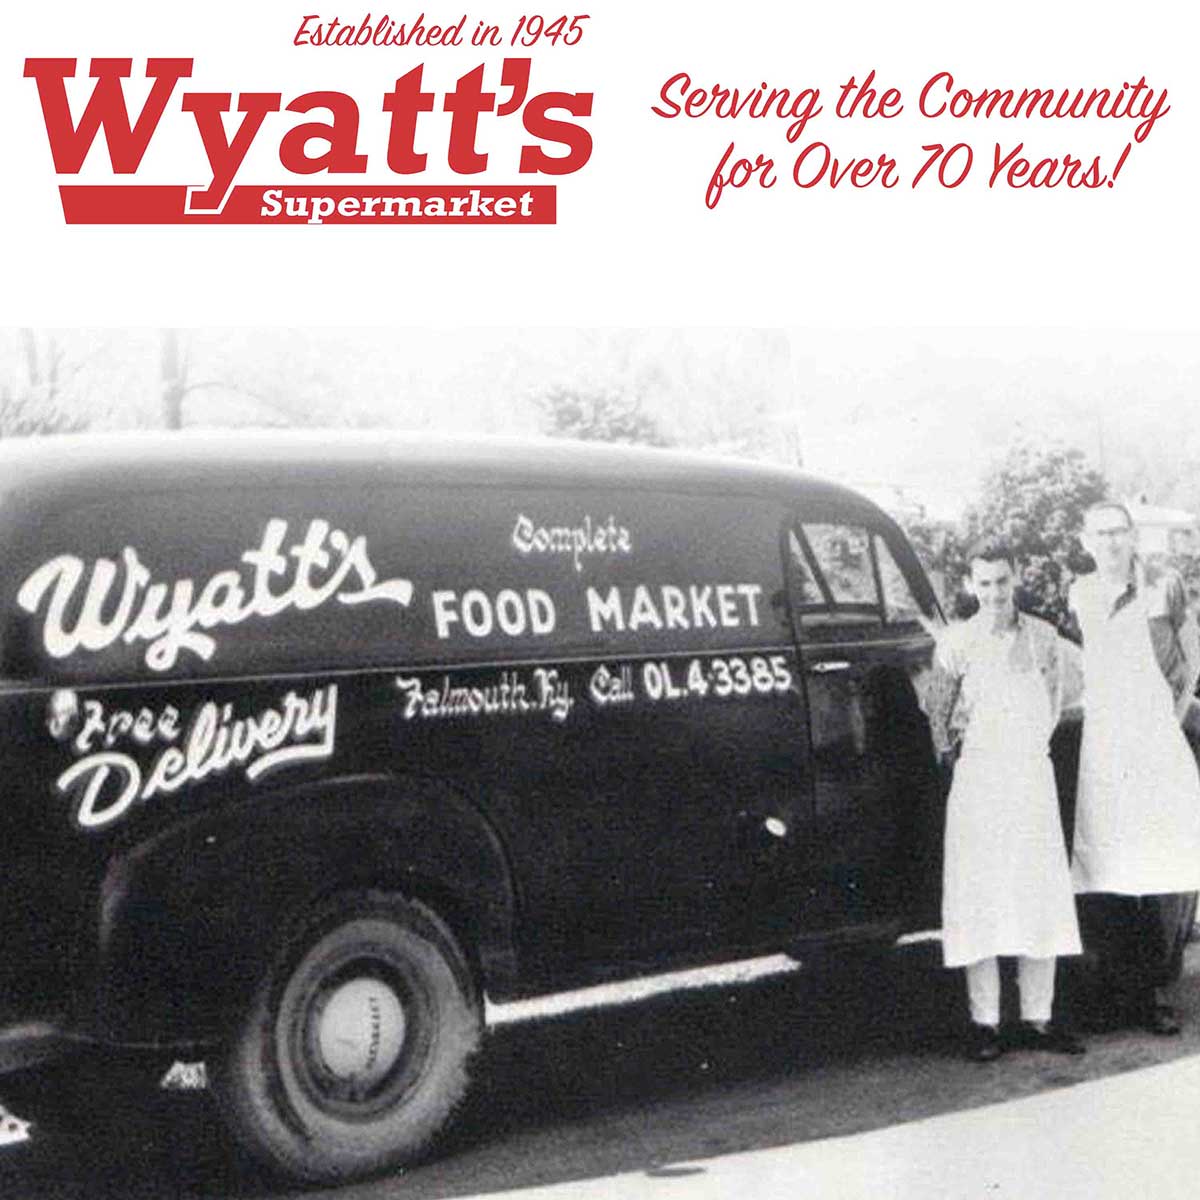 Serving the Community for over 70 years